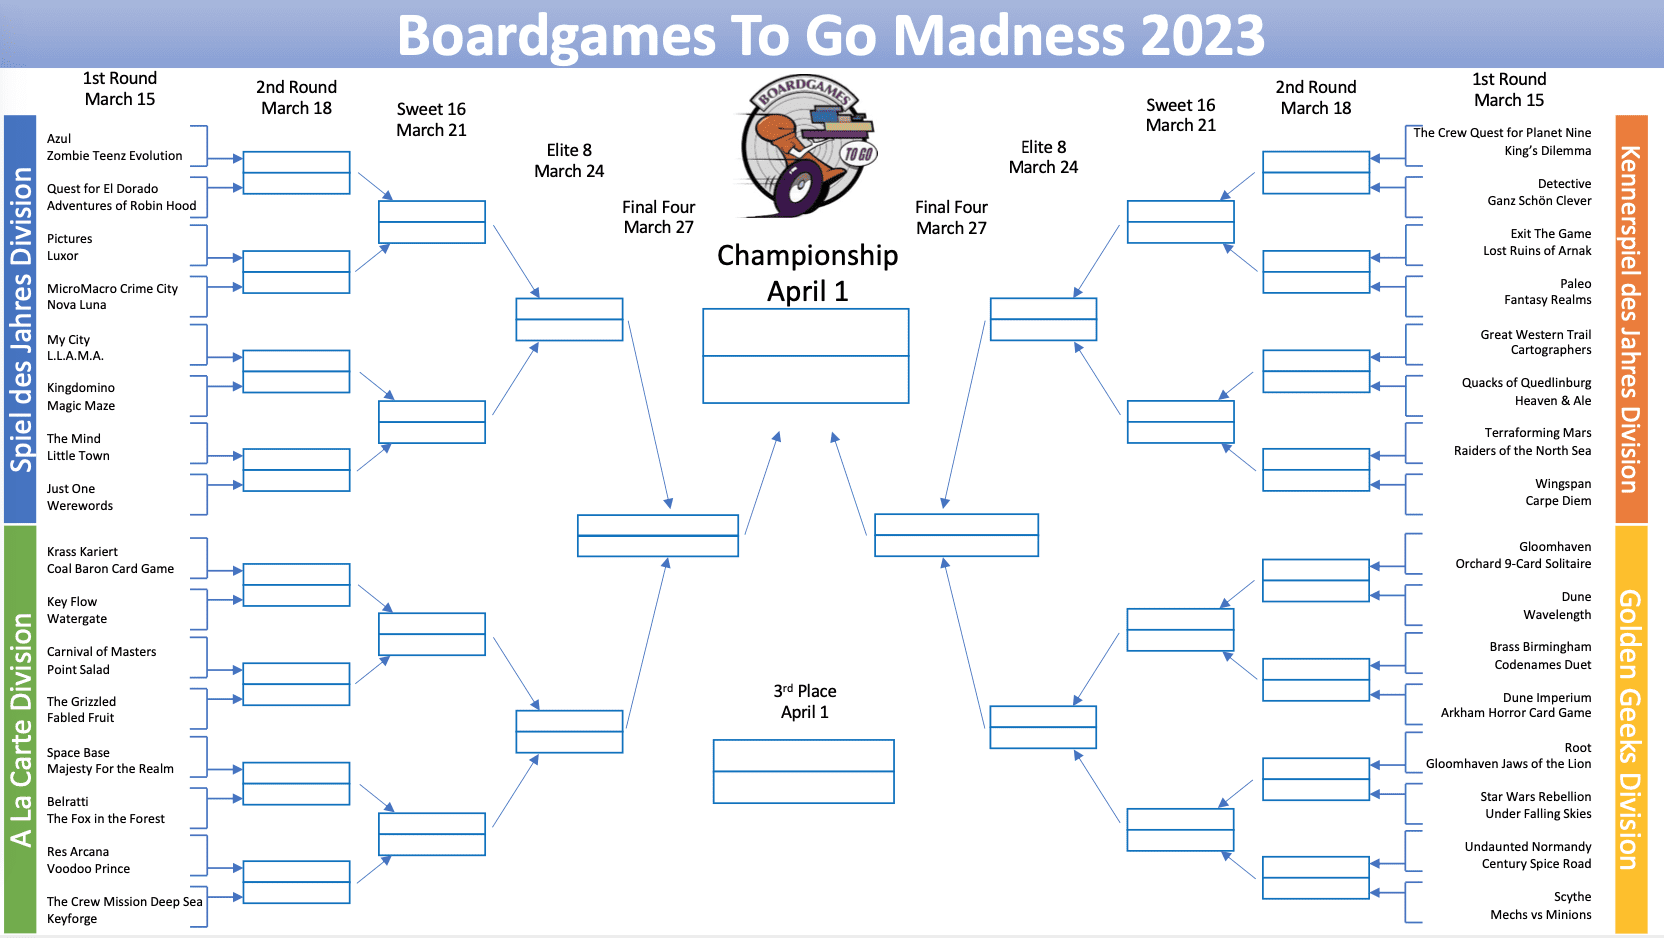 Top Board Games of All Time 2023 Edition (31-40), Board Game Hot Takes  Podcast